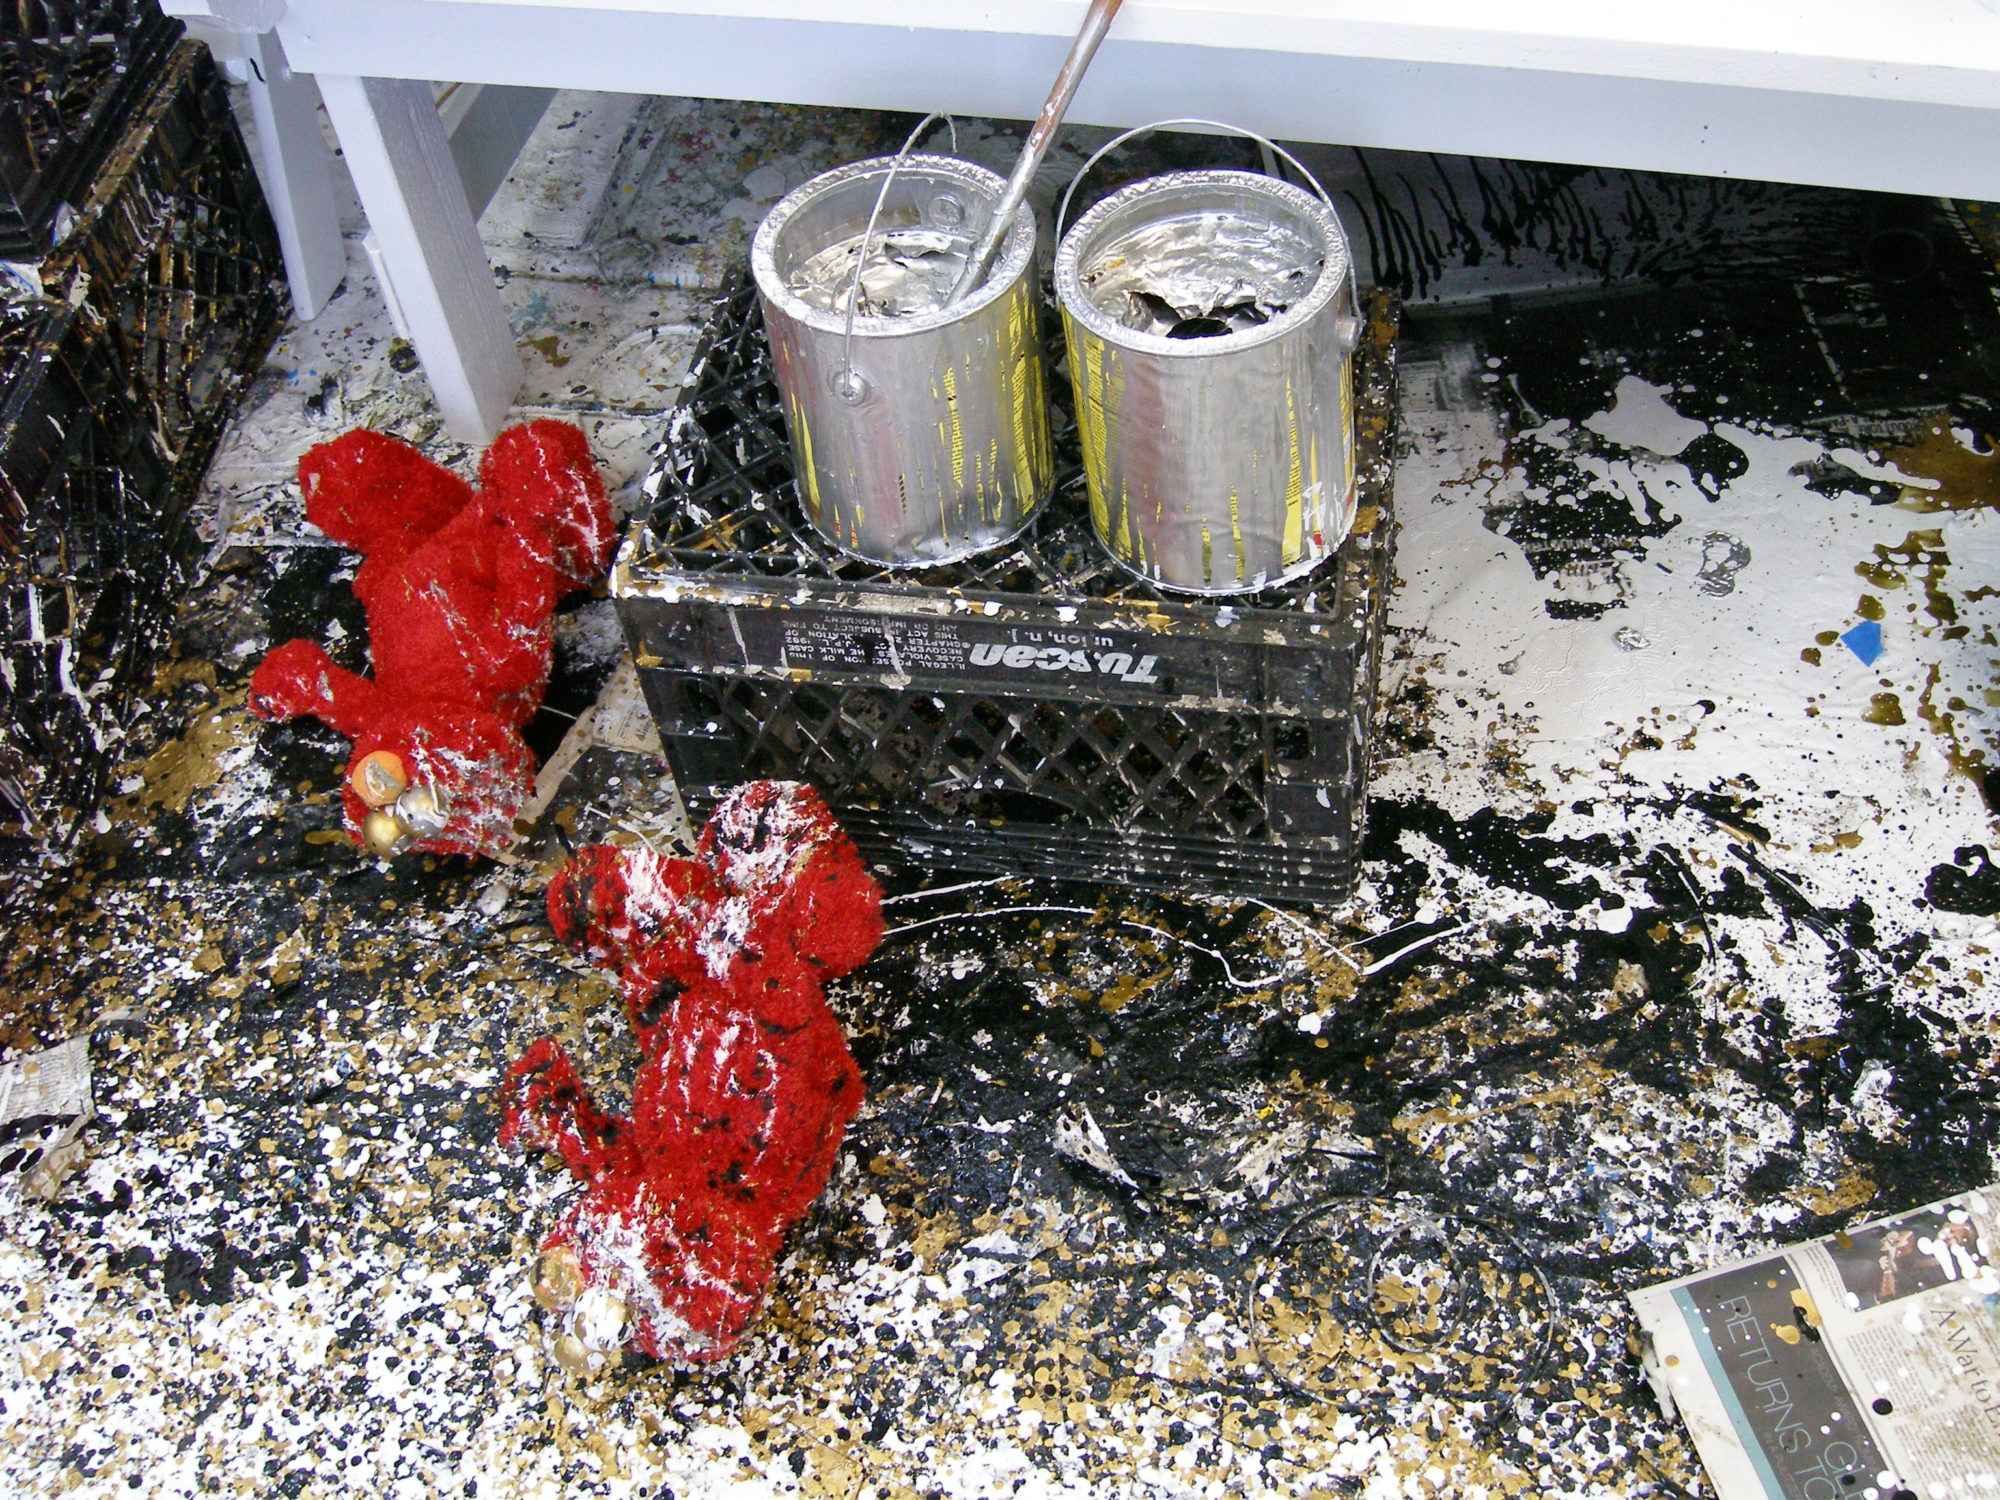 Photo contains two large elmo toys with one black crate and 2 silver paintcans splattered in gold, white and black paint.